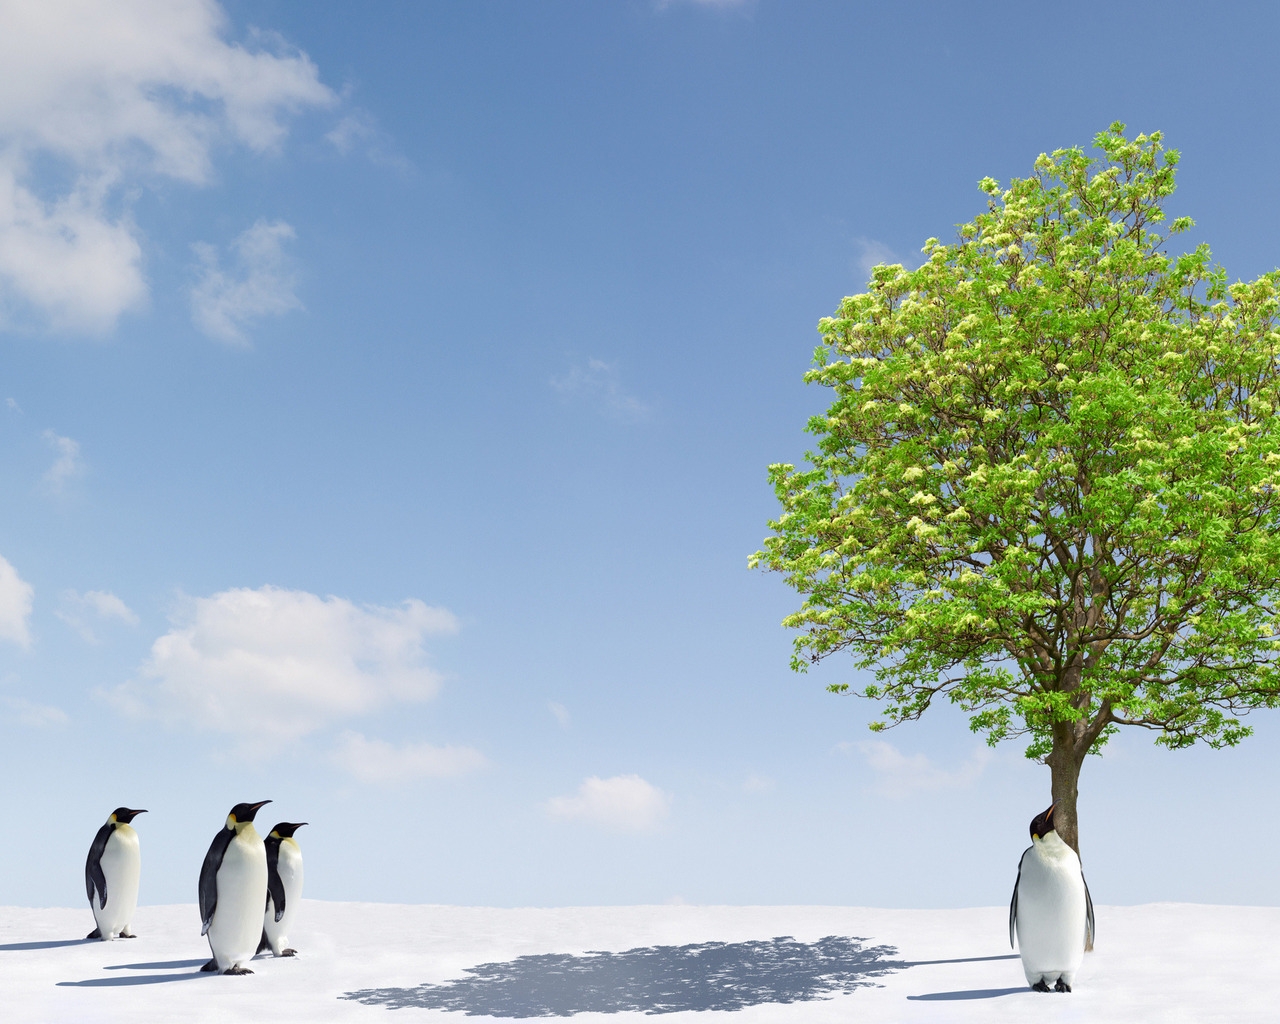 Penguins and tree